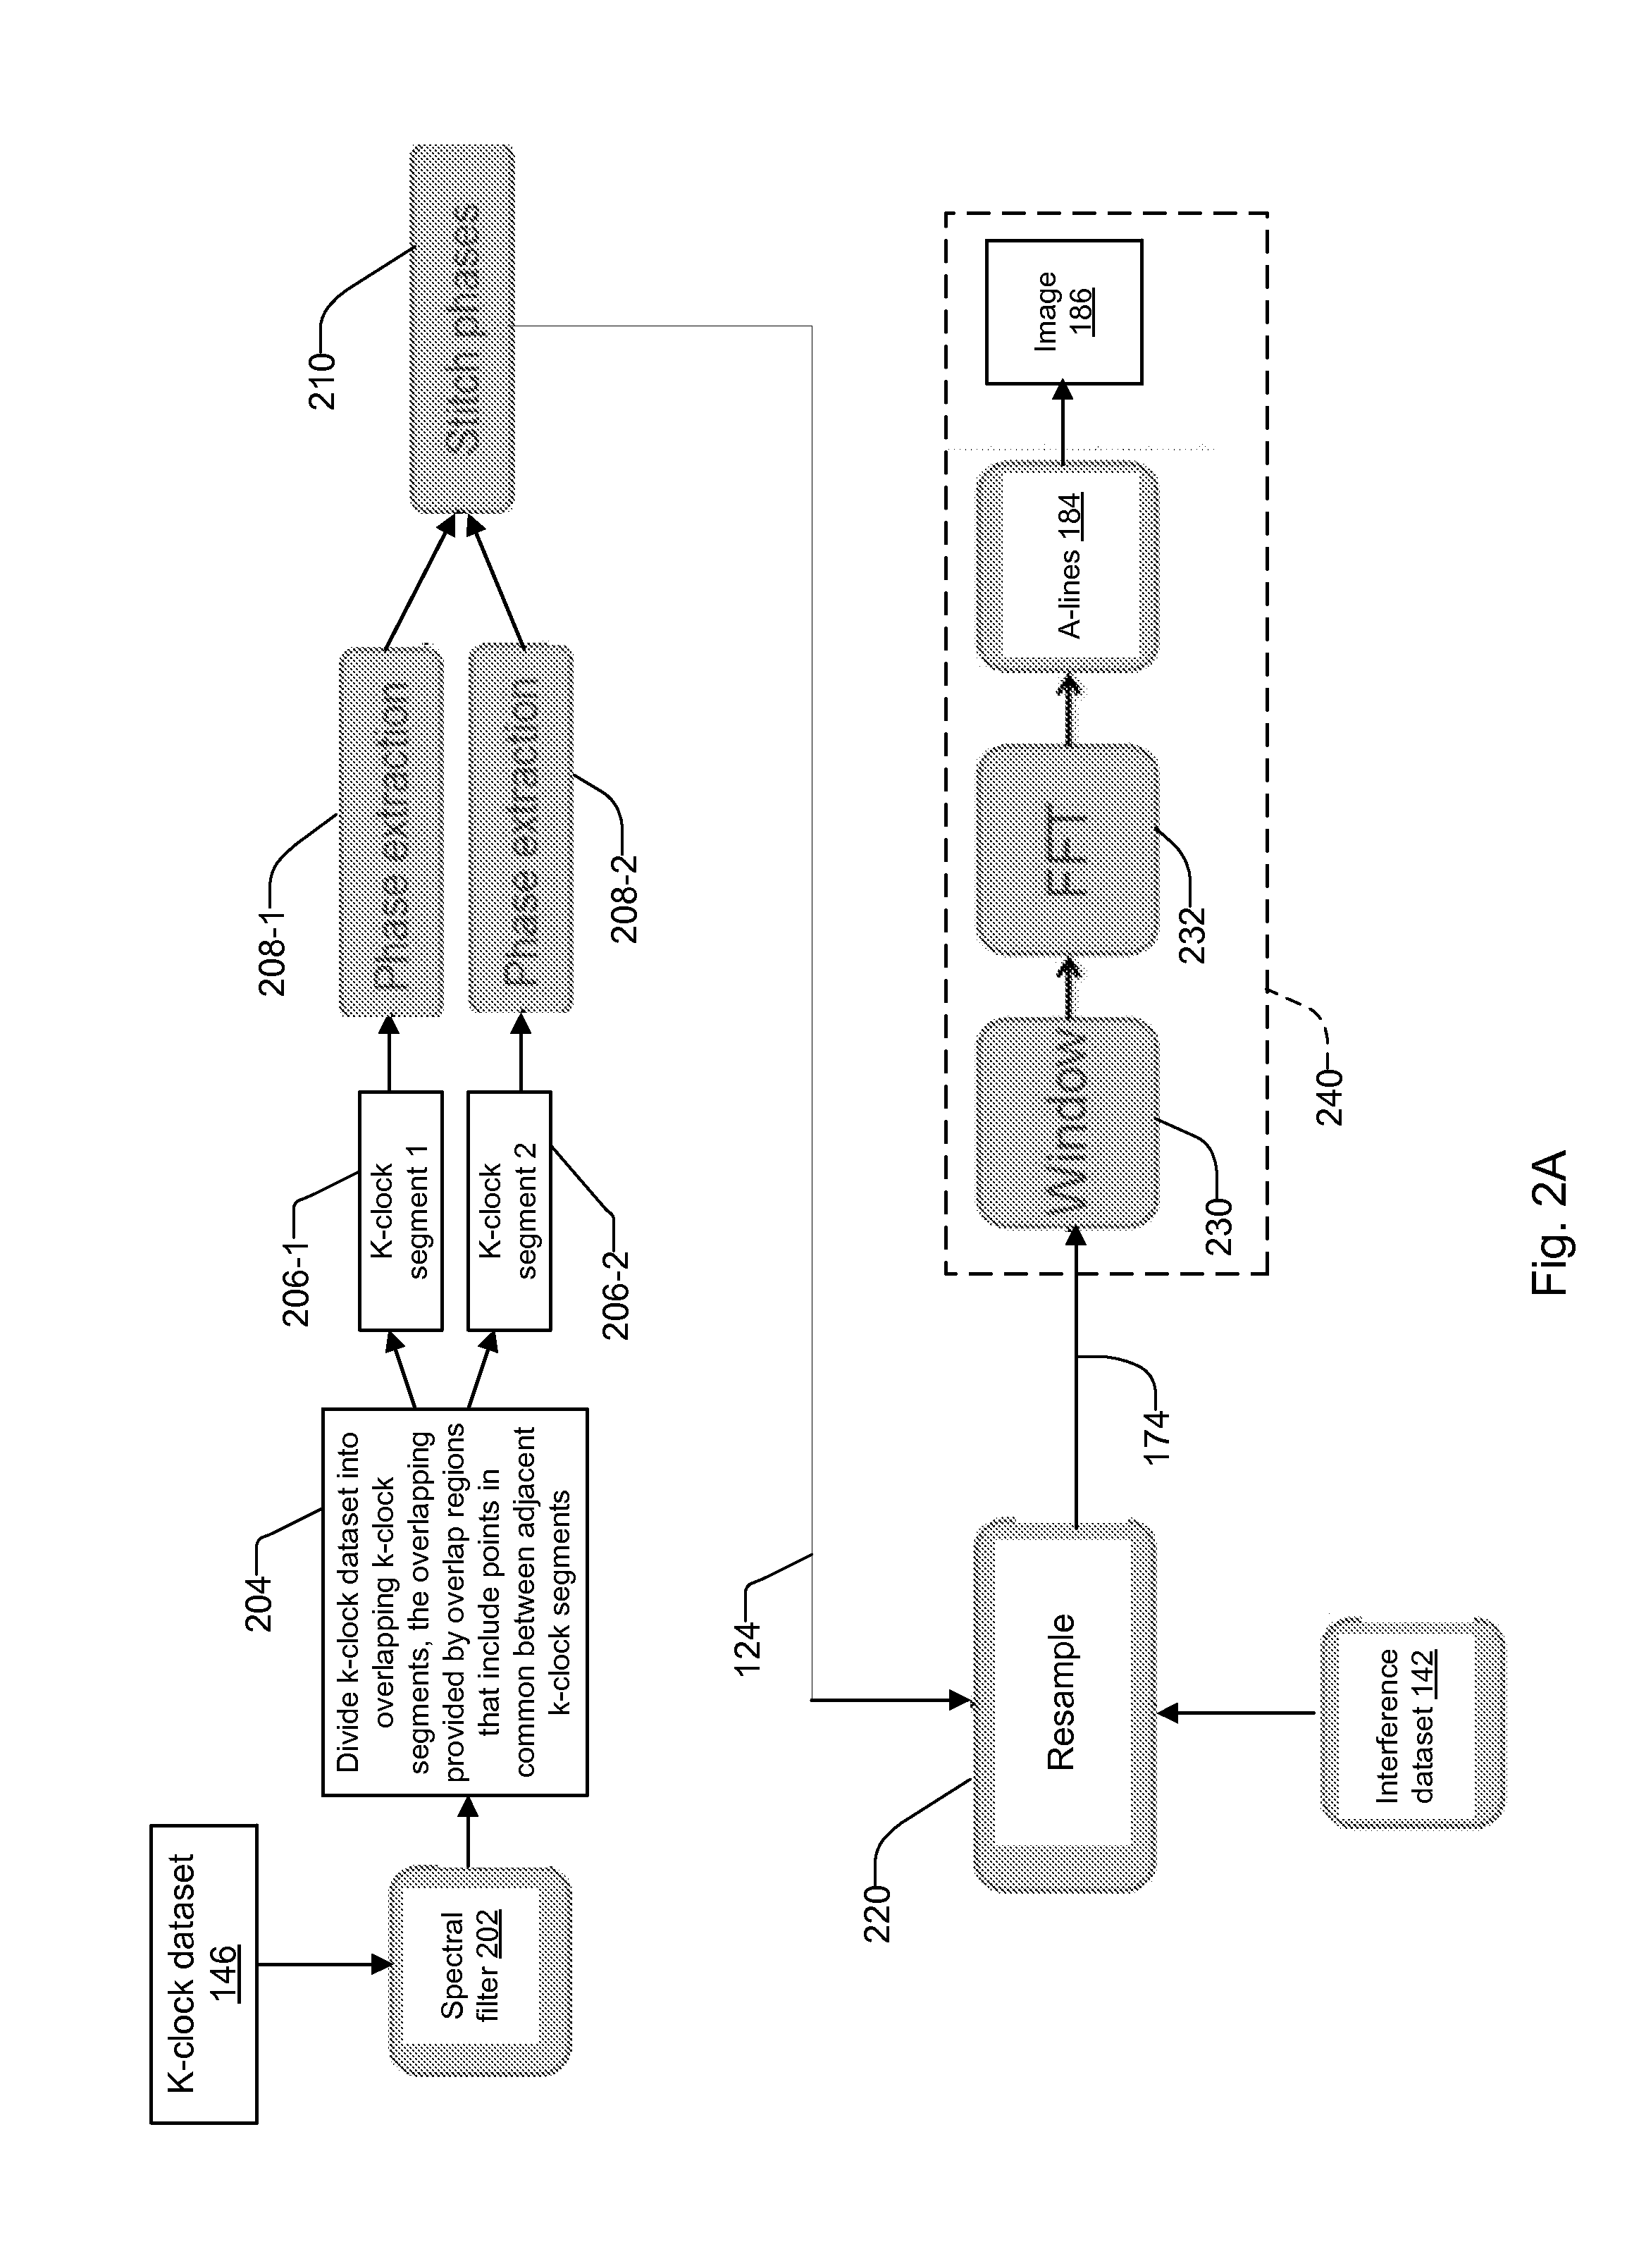 System and Method for Resampling Optical Coherence Tomography Signals in Segments